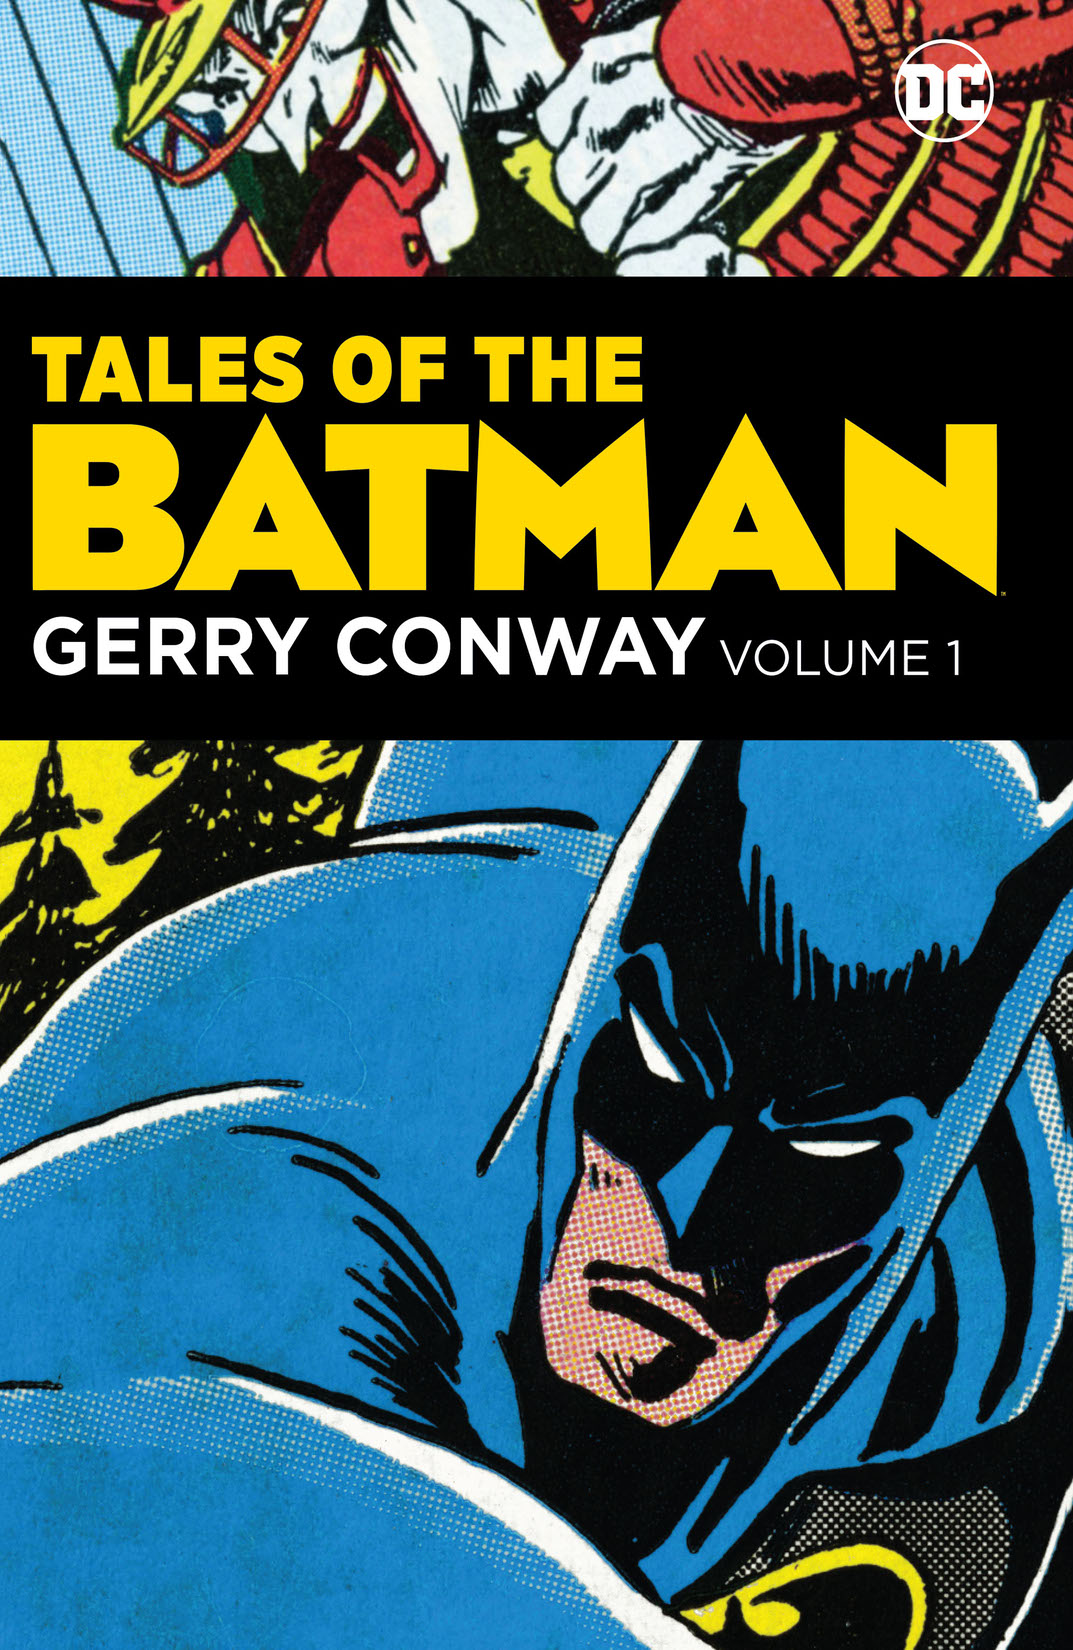 Tales of the Batman: Gerry Conway preview images